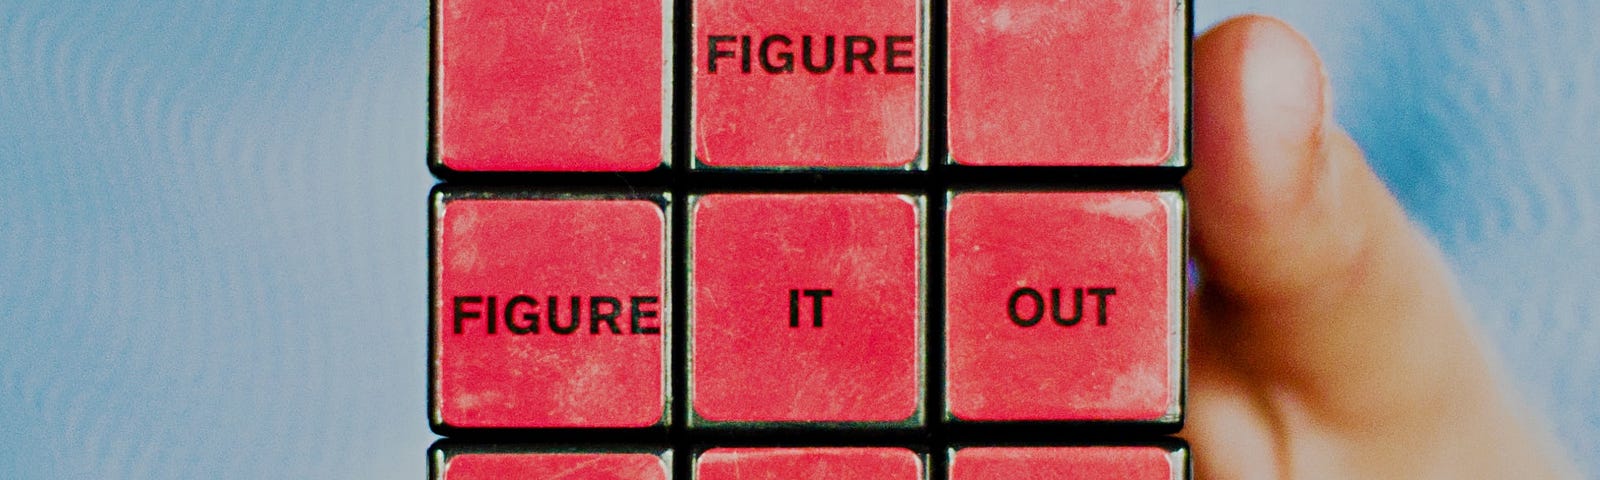 Picture of a Rubik’s cube with the words “Figure it out” on it.